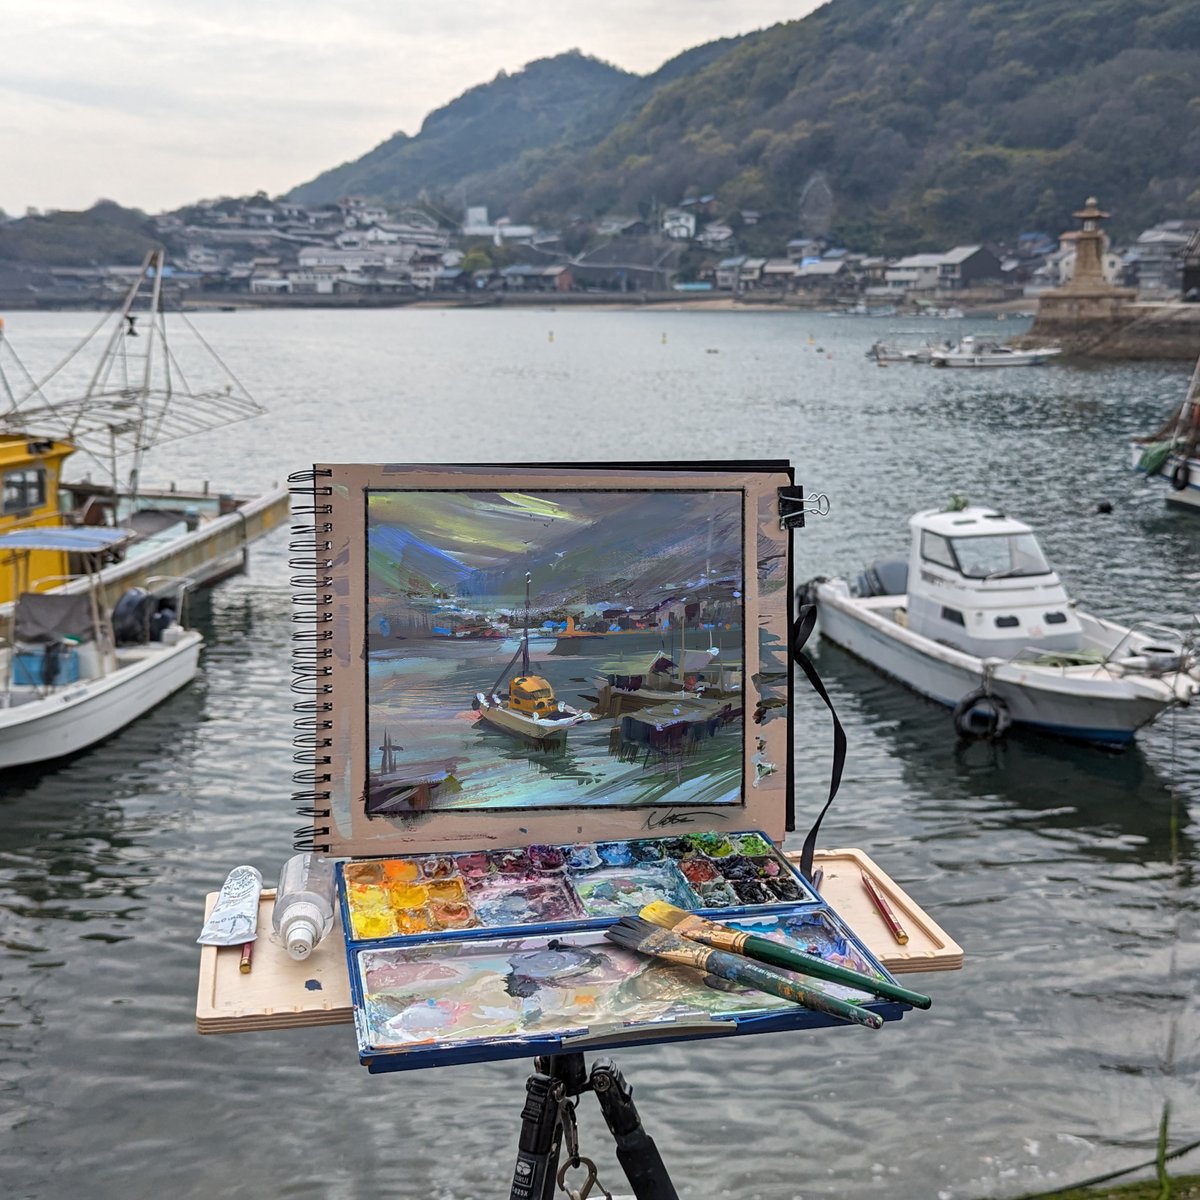 Another demo from the Japanese harbor of Tomonoura. I used the yellow idea from the ship on the left to bump up my focus which was the ship to the right.